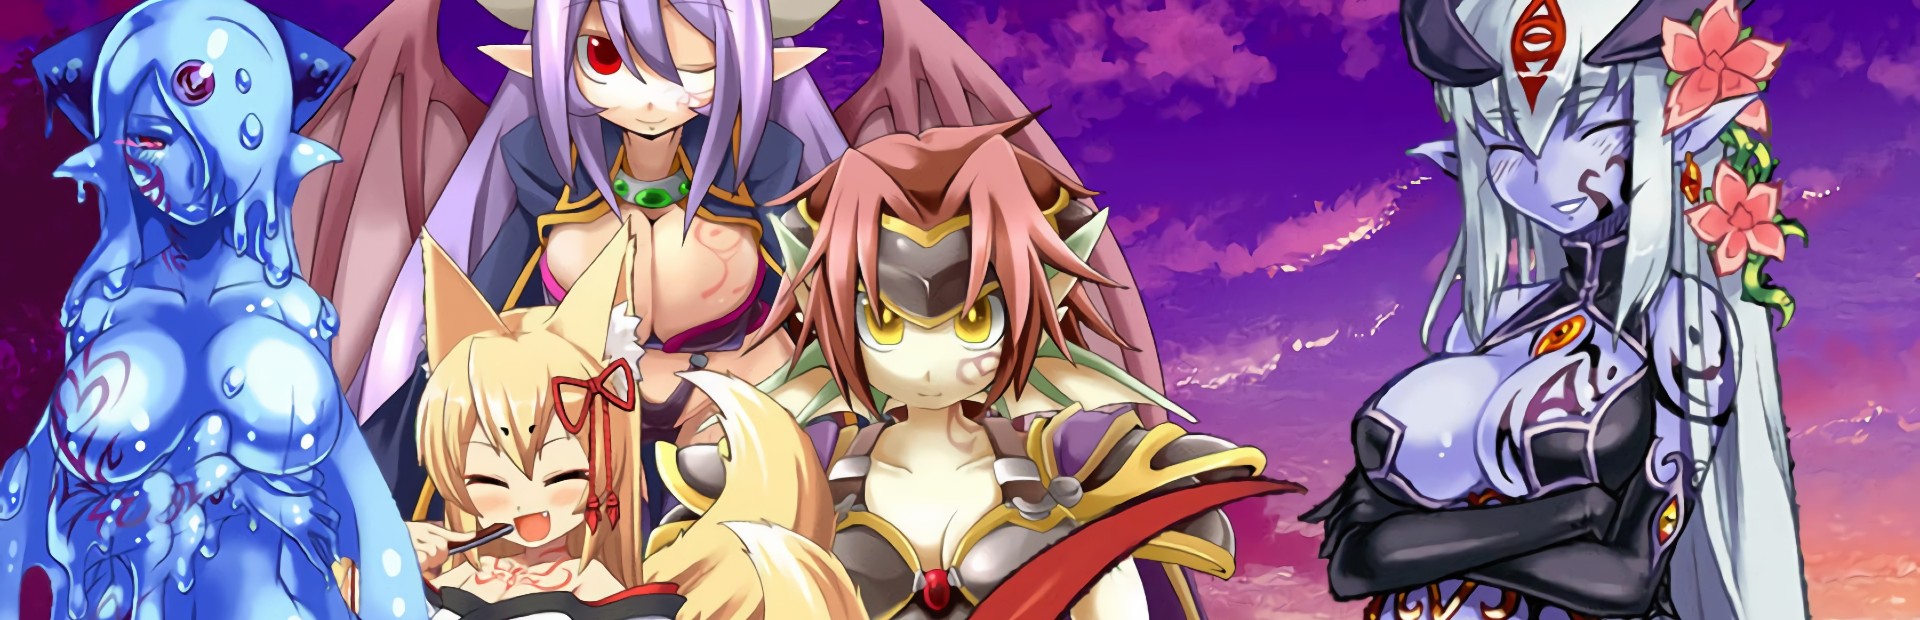 alberta sutton recommends monster girl quest android pic